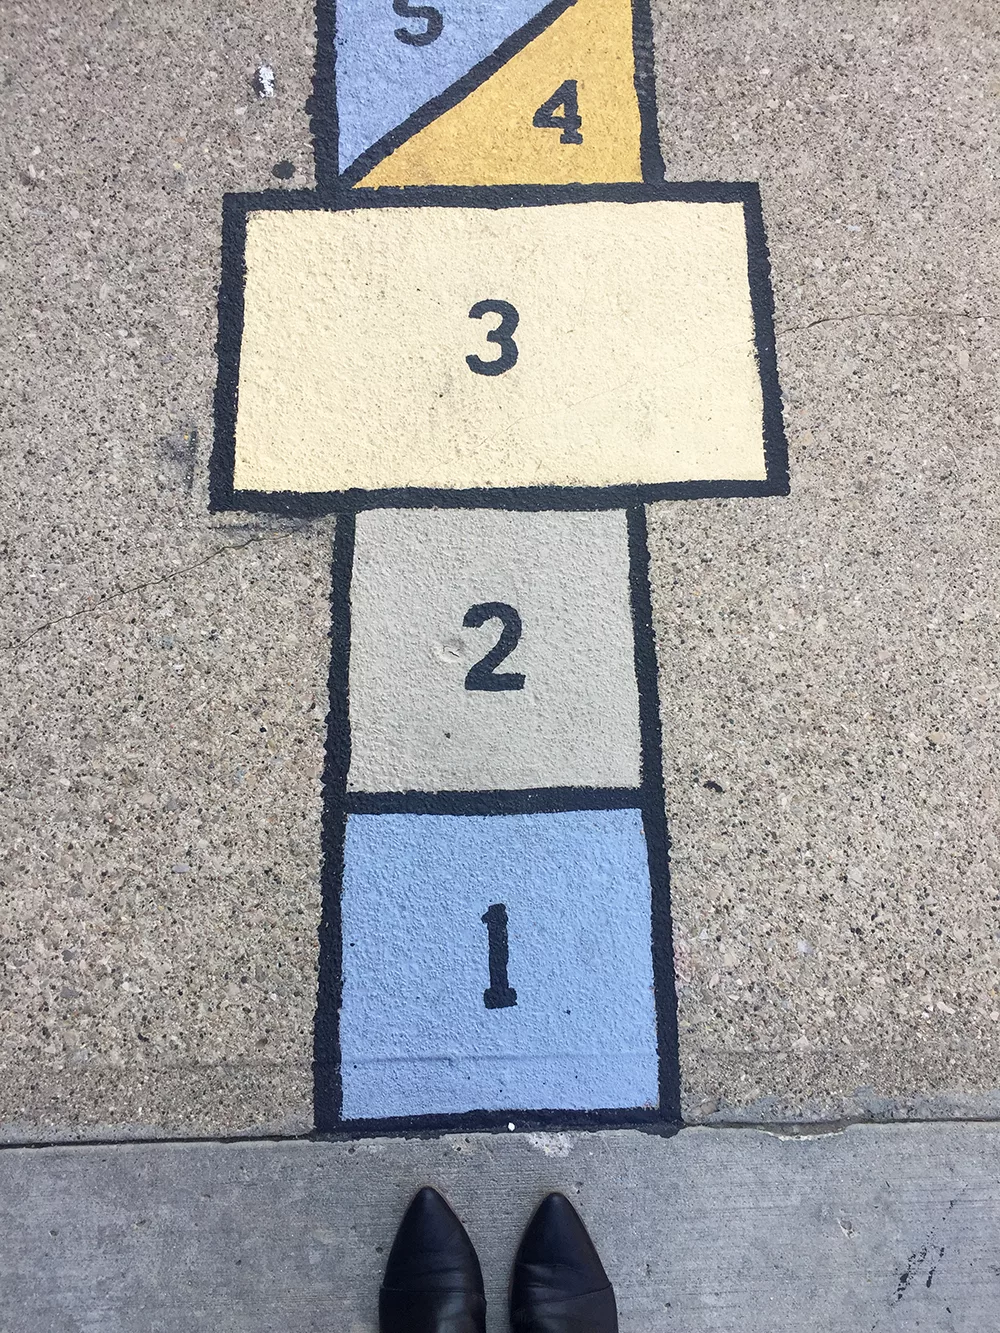 Painted hopscotch inspired by Frank Lloyd Wright in Mason City, Iowa